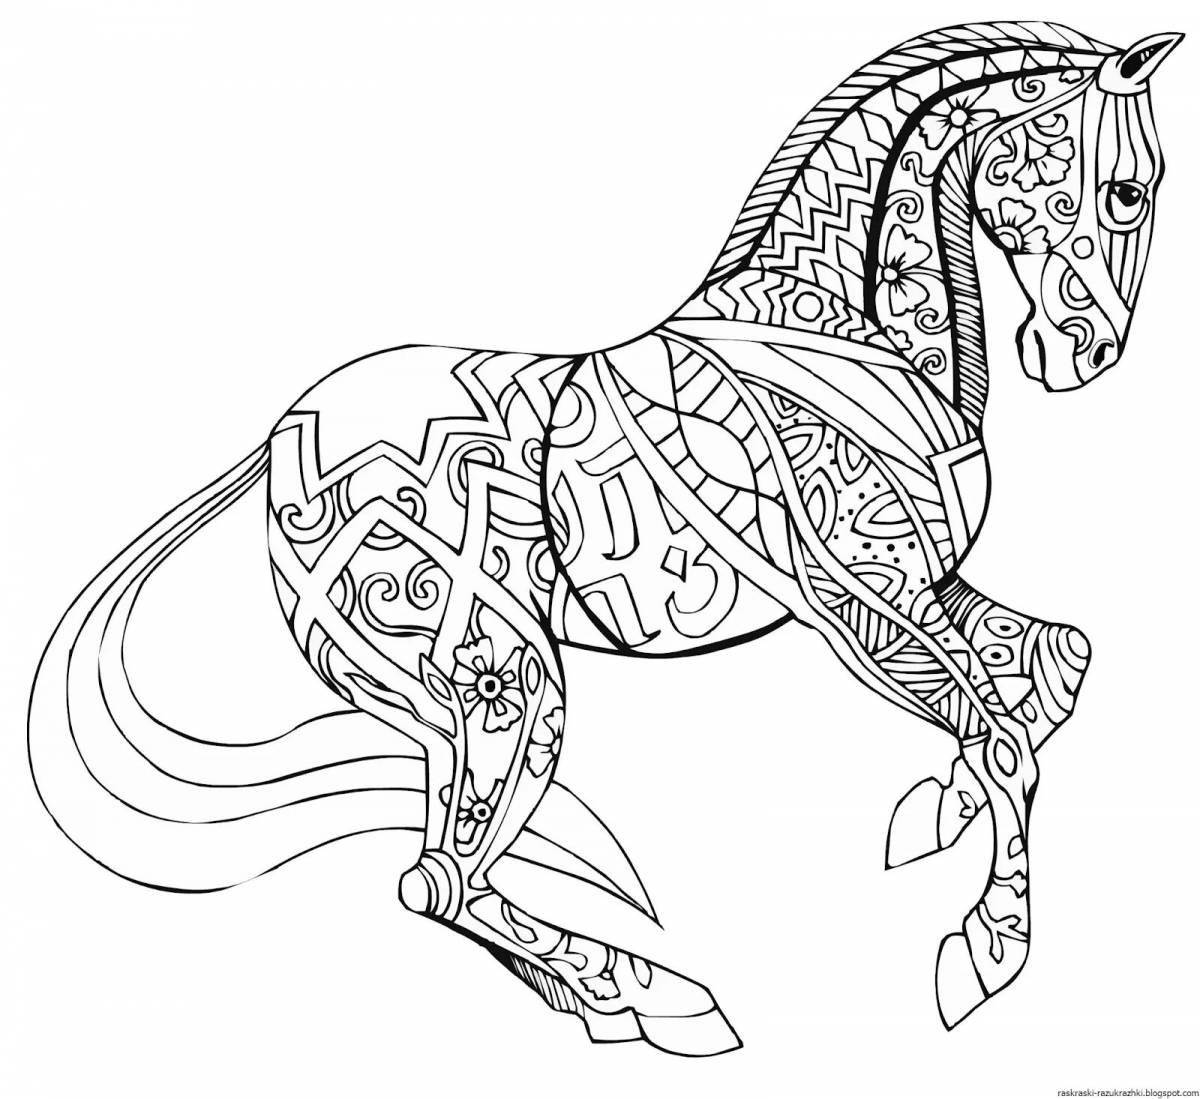 Exquisite animal coloring book for girls